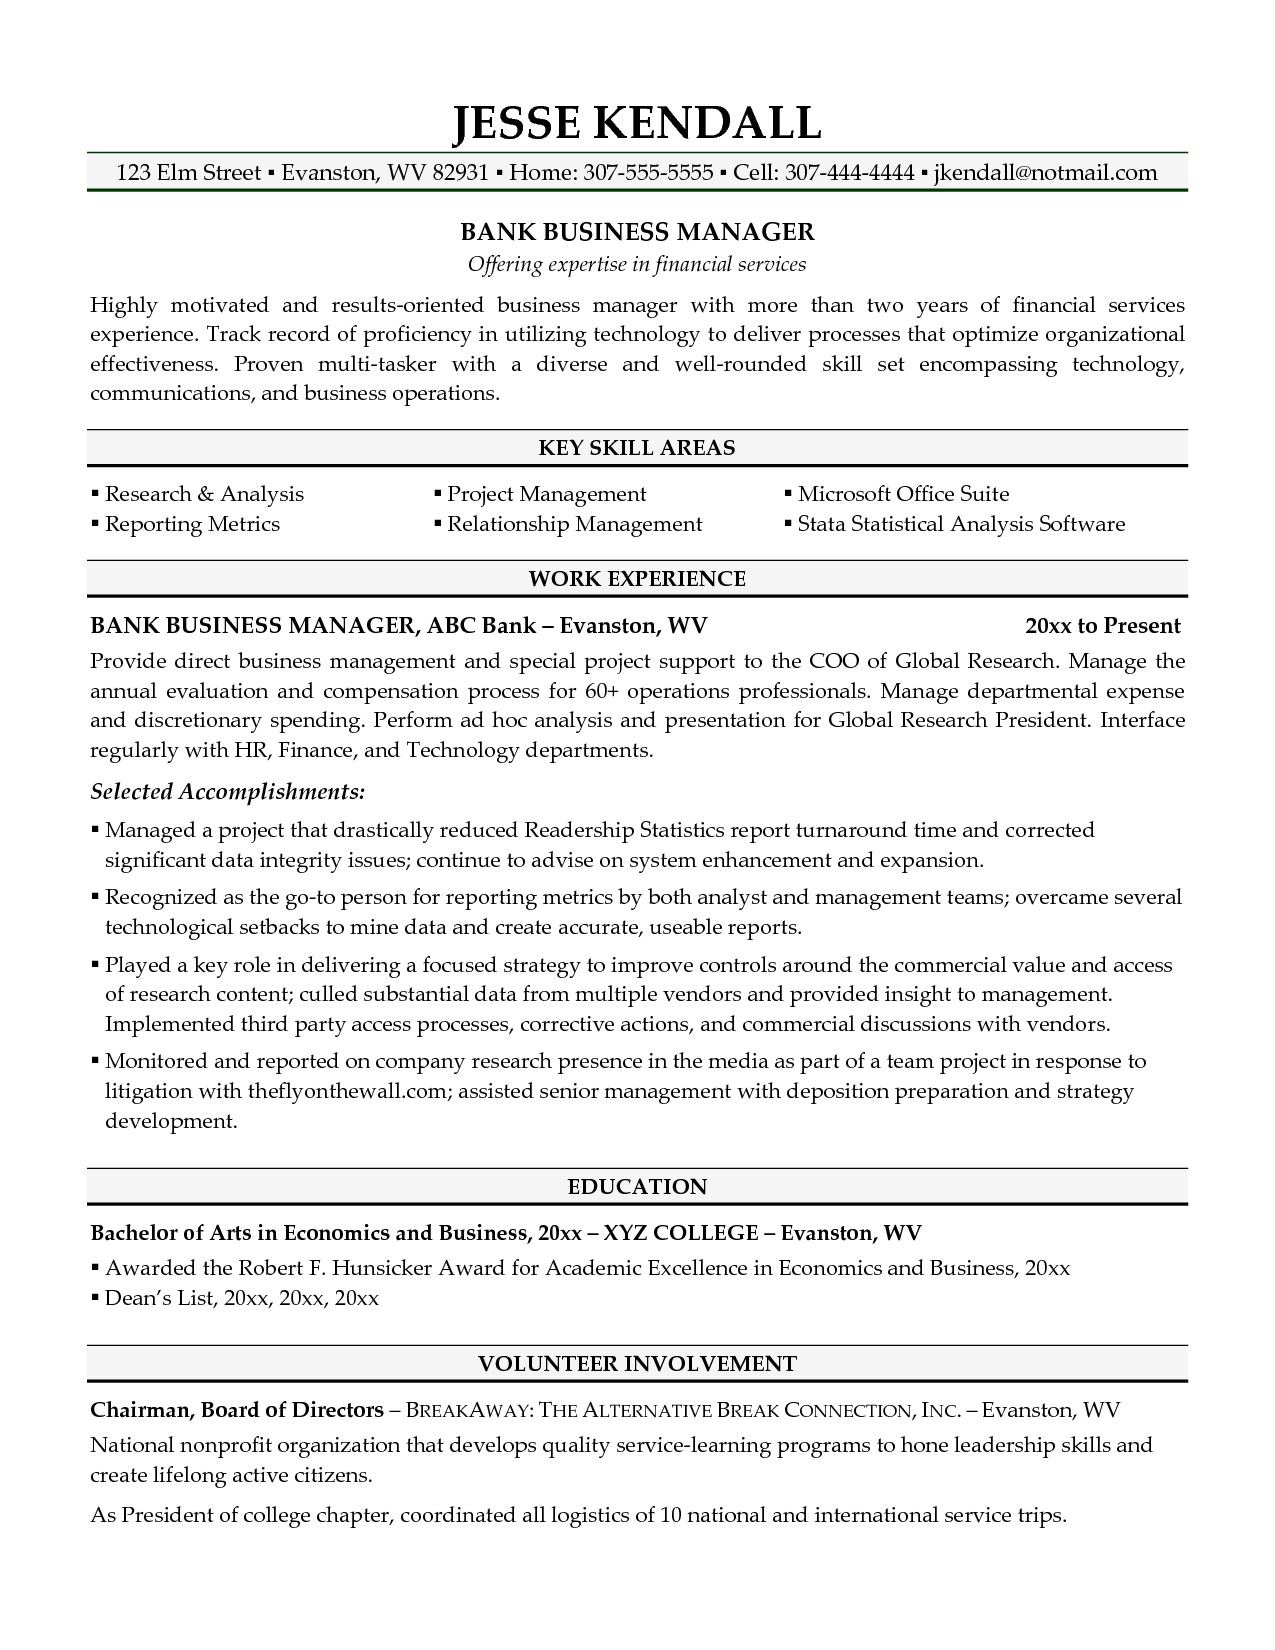 resume with business management degree